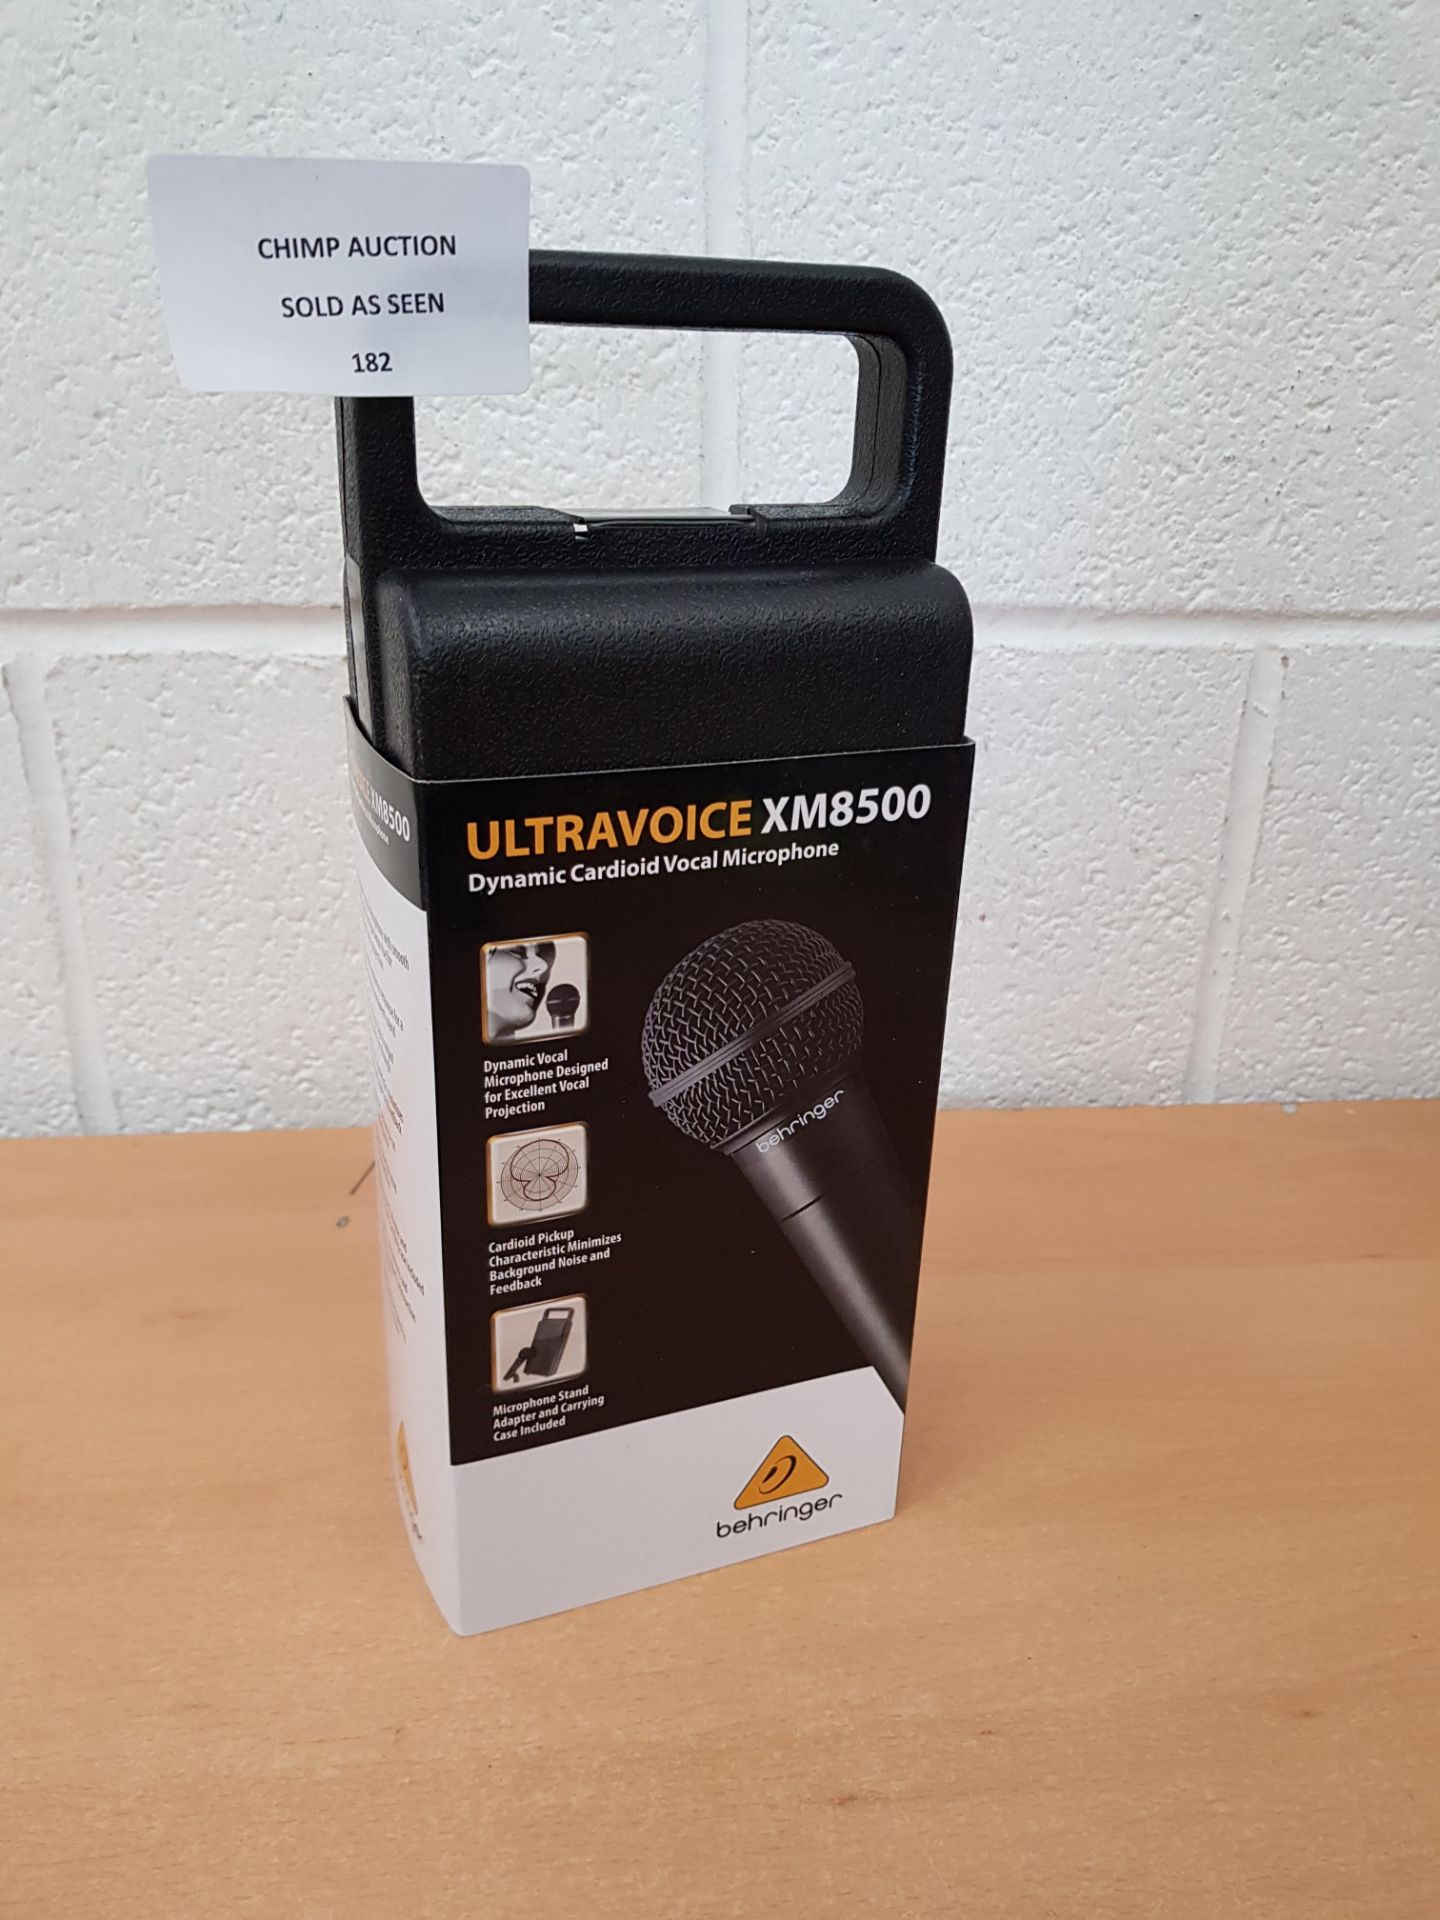 Behringer XM8500 Ultravoice Dynamic Cardioid Vocal Microphone